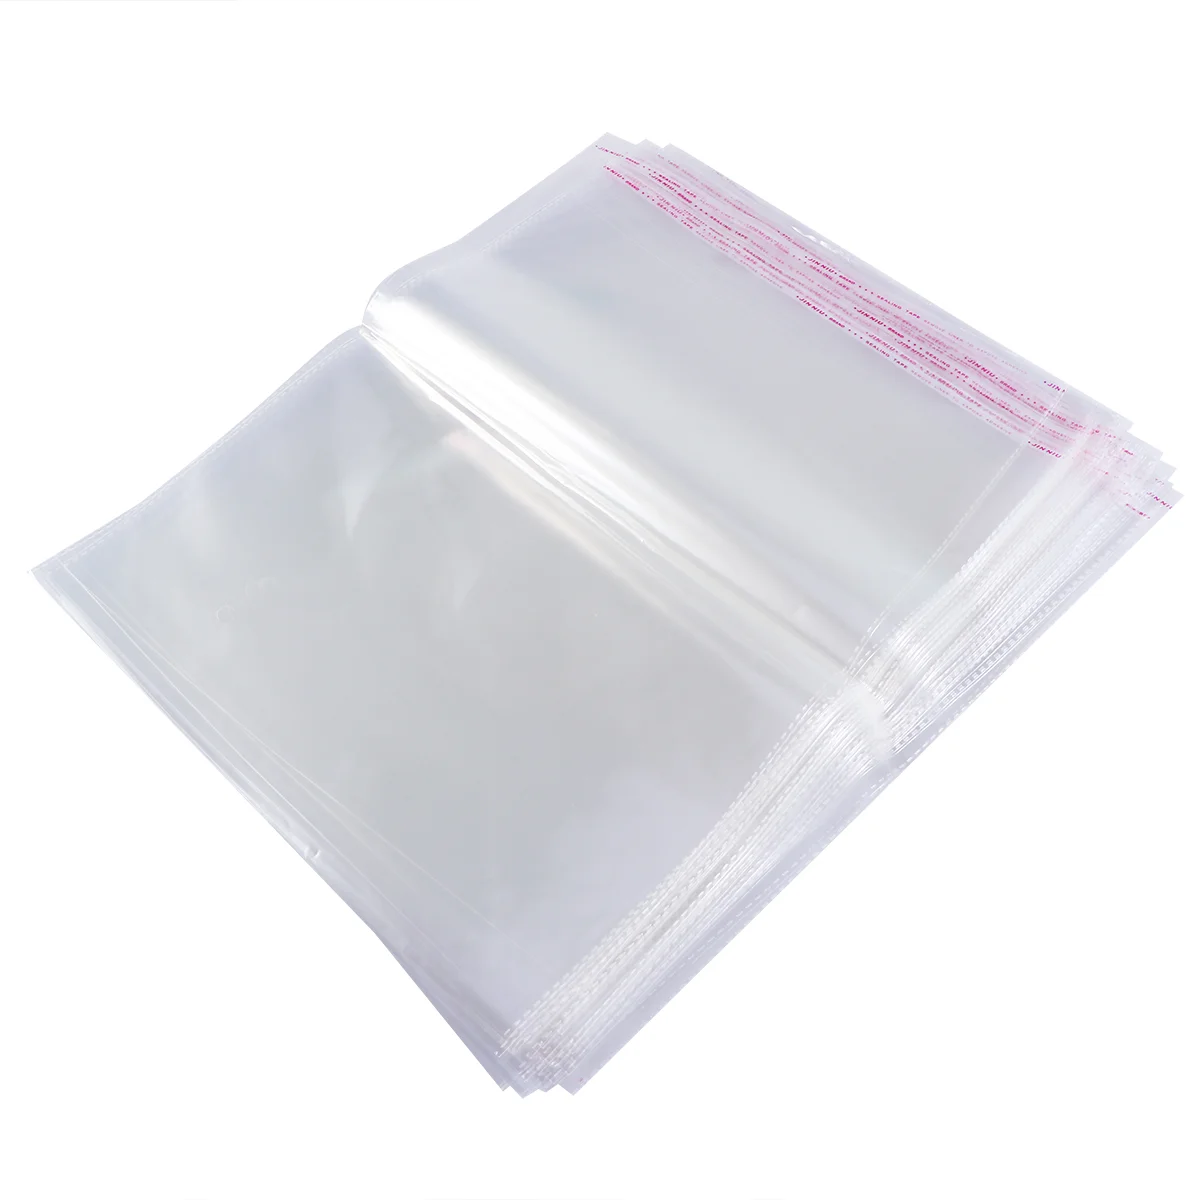 

Cello Cellophane Clear Poly Packaging Bakery Self Resealable Wrap Cookie Adhesive Sealing Gift Adhensive Treat Apparel Pouch